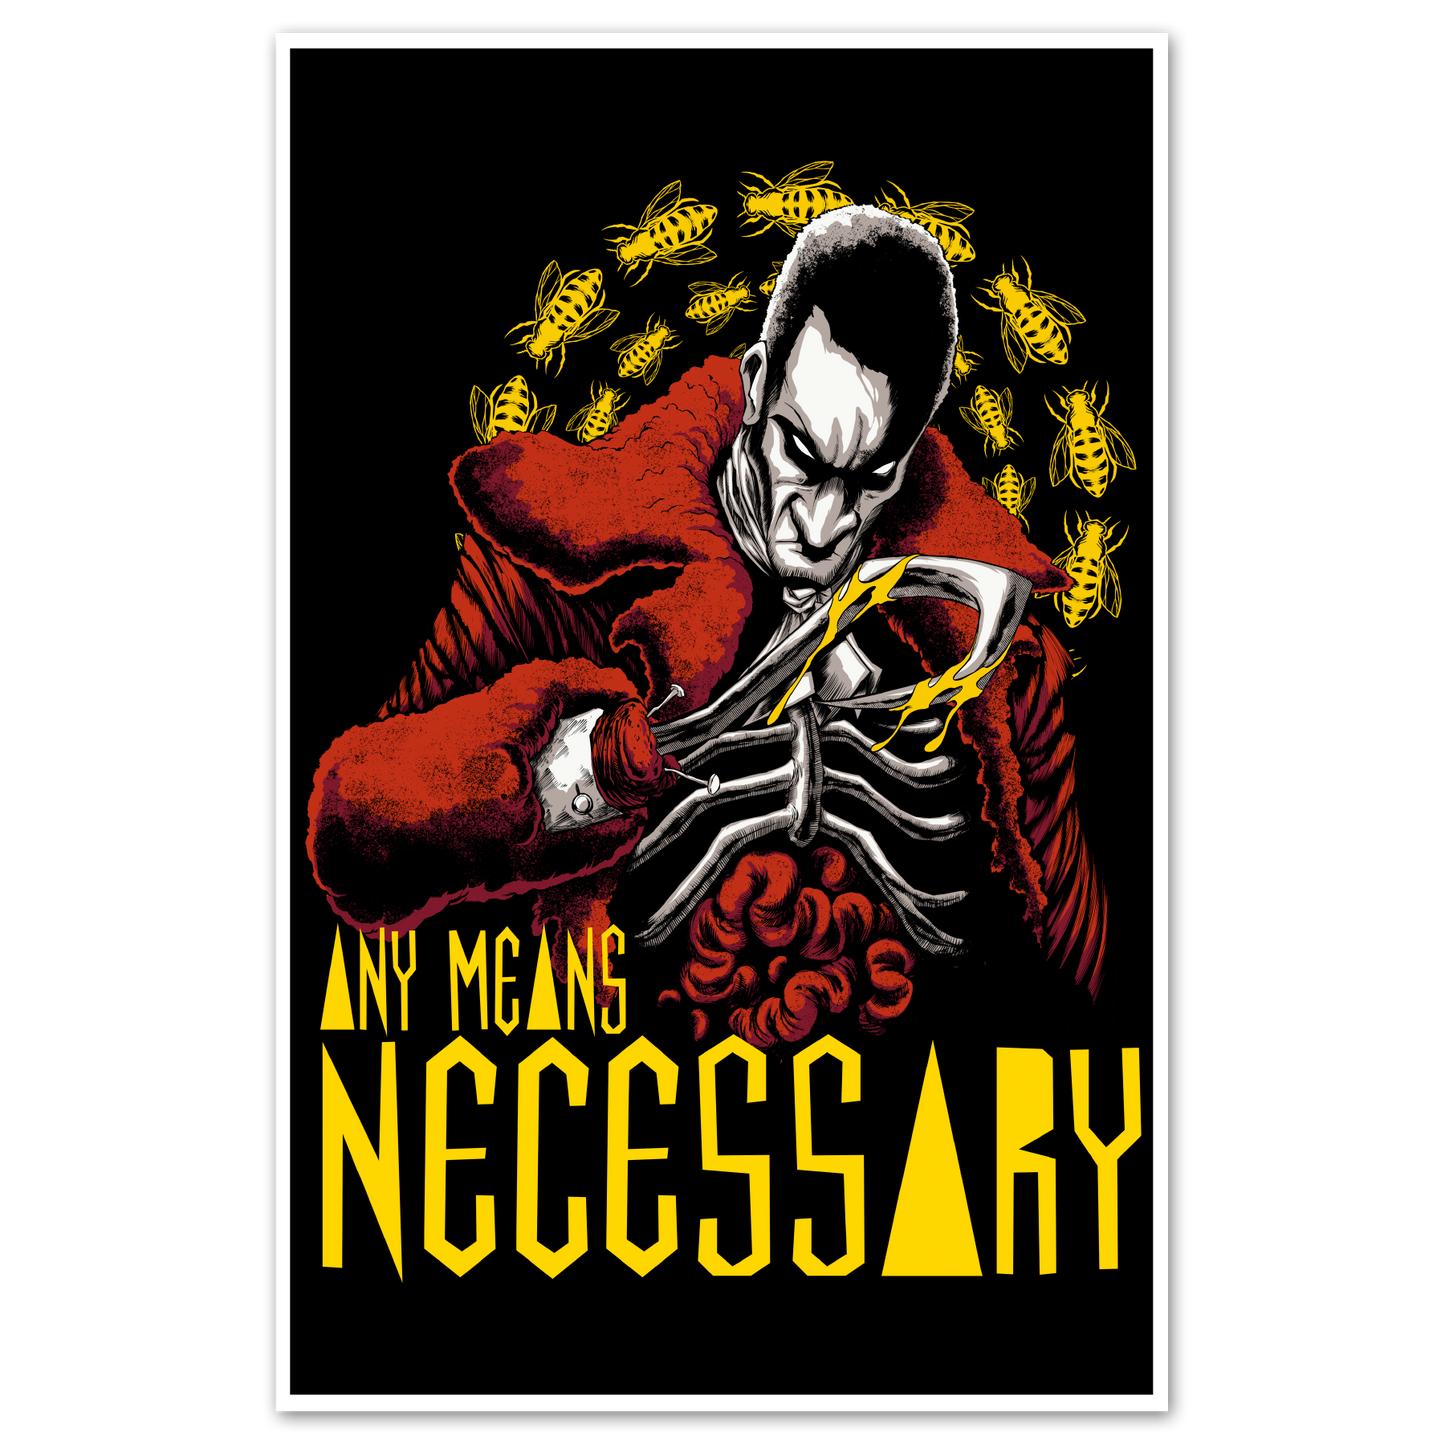 any means necessary shawn coss candyman 11x17 poster print